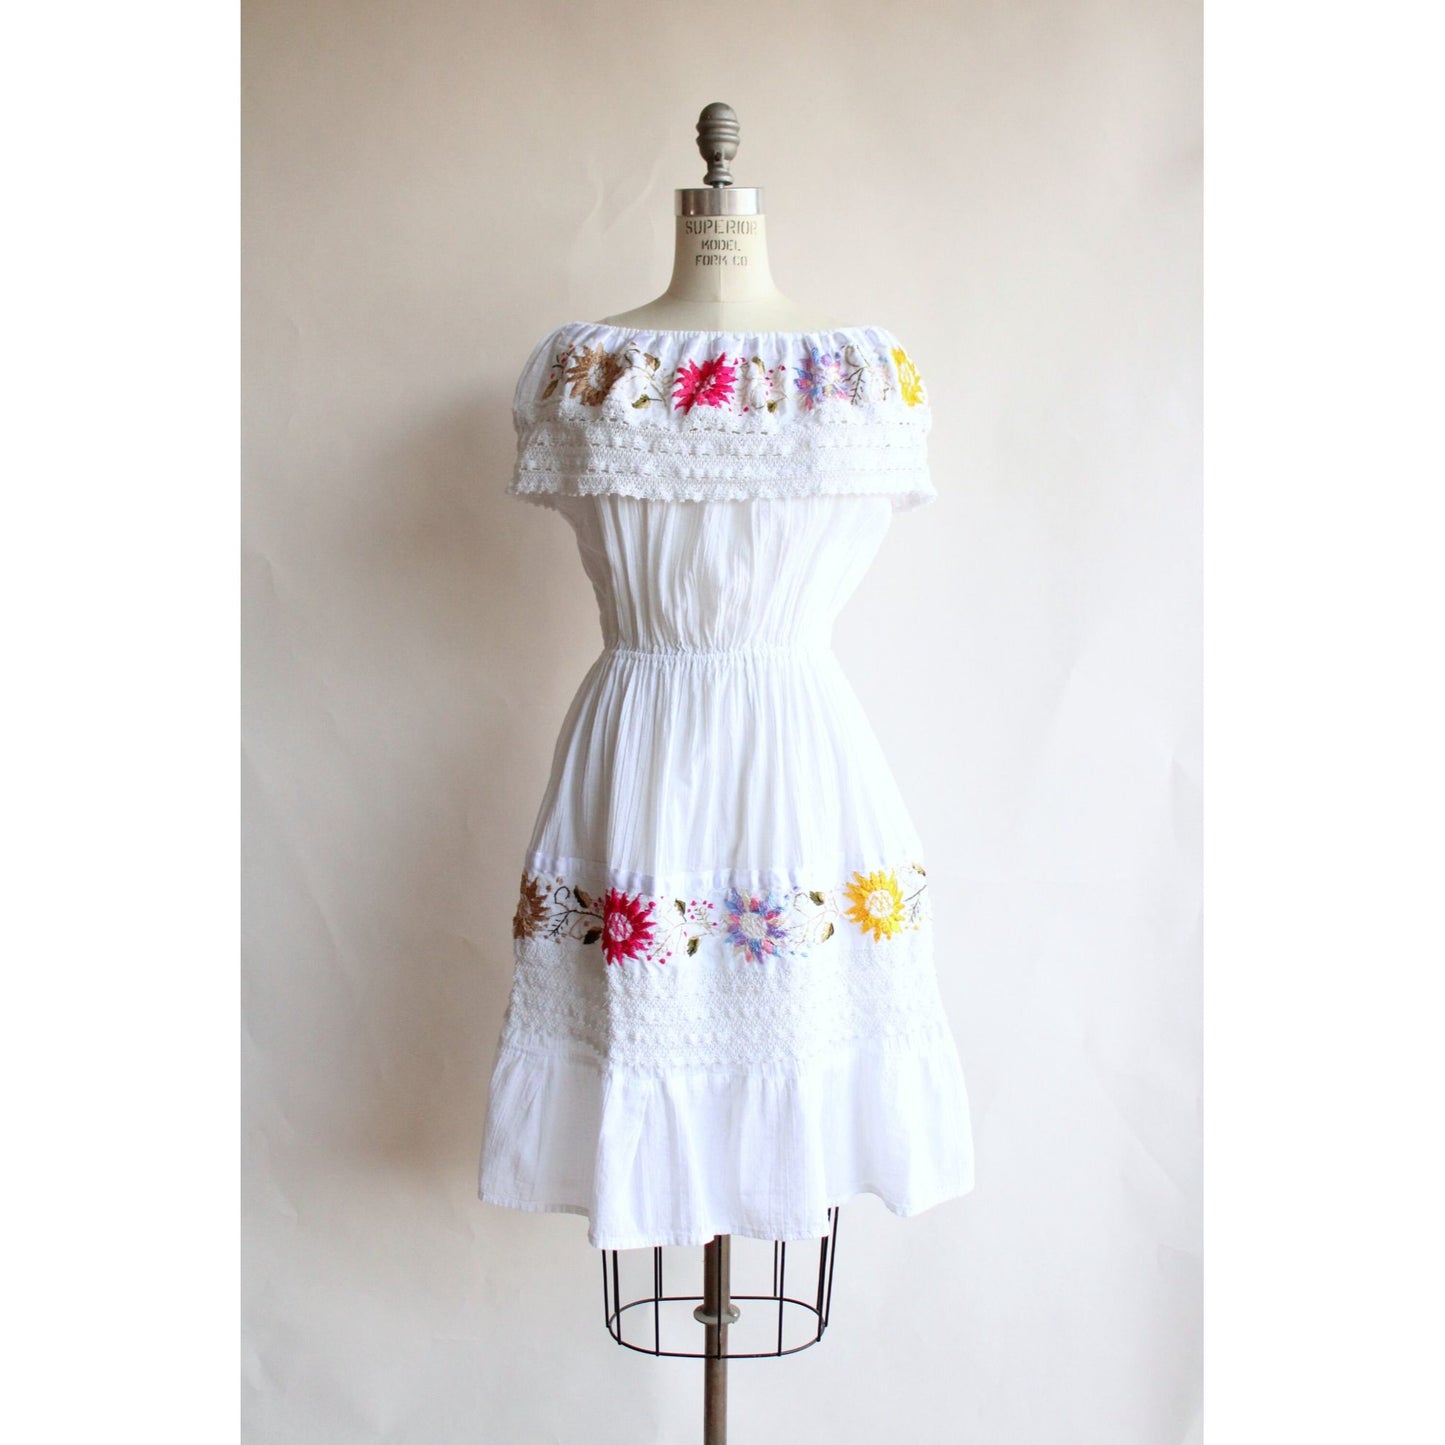 Vintage 1970s 1980s Dress,  White Cotton Embroidered Peasant Dress, Large Size